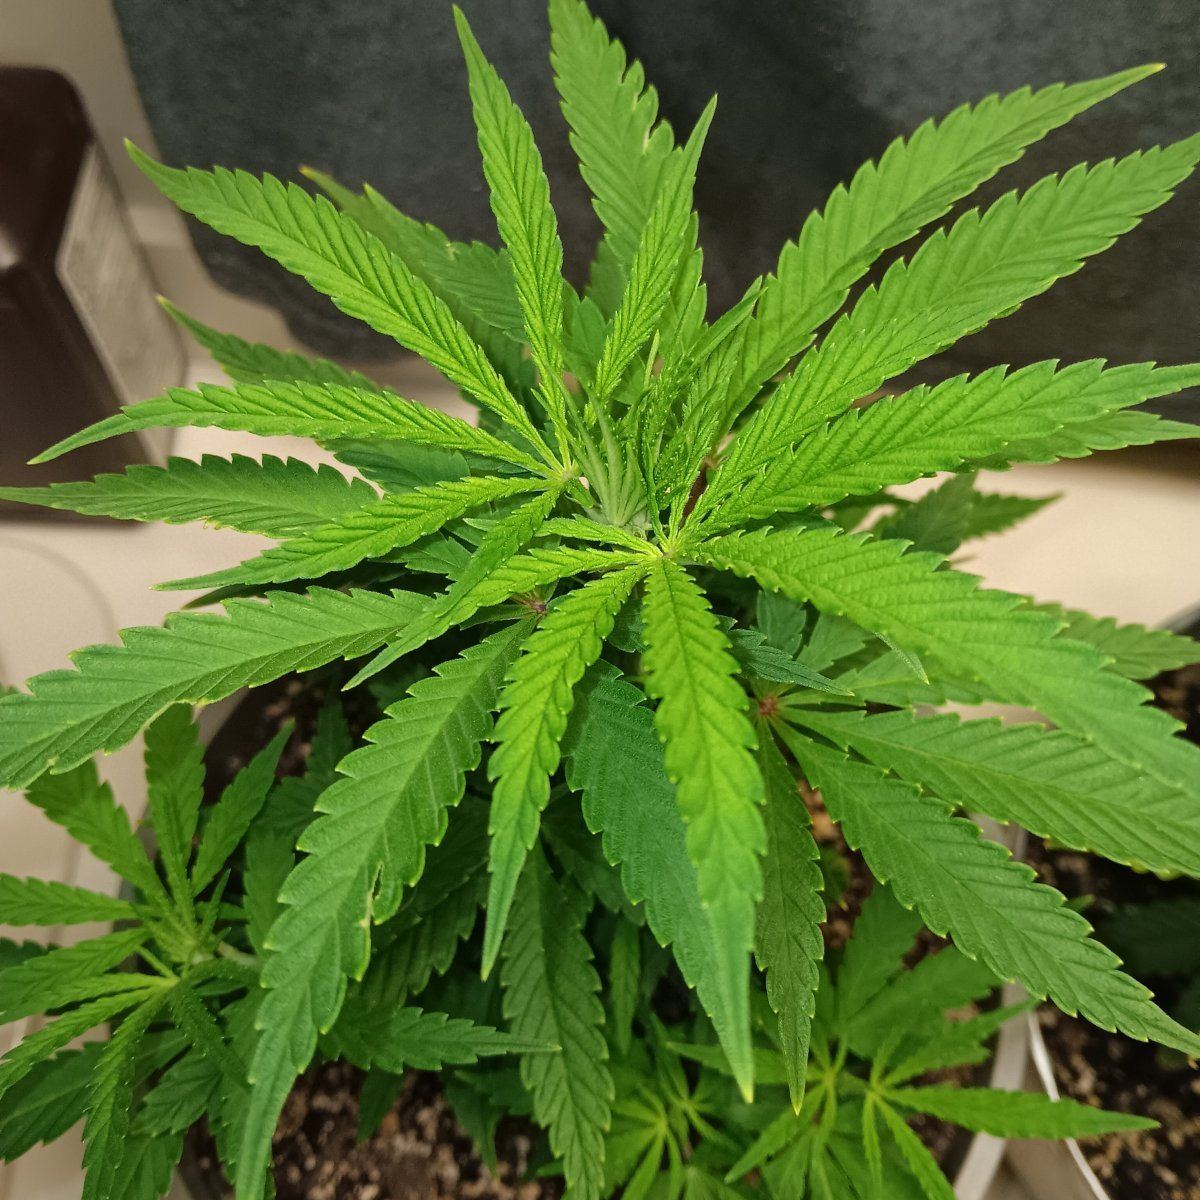 Any help would be appreciated new grower here having a color issue with one plant being too li 7